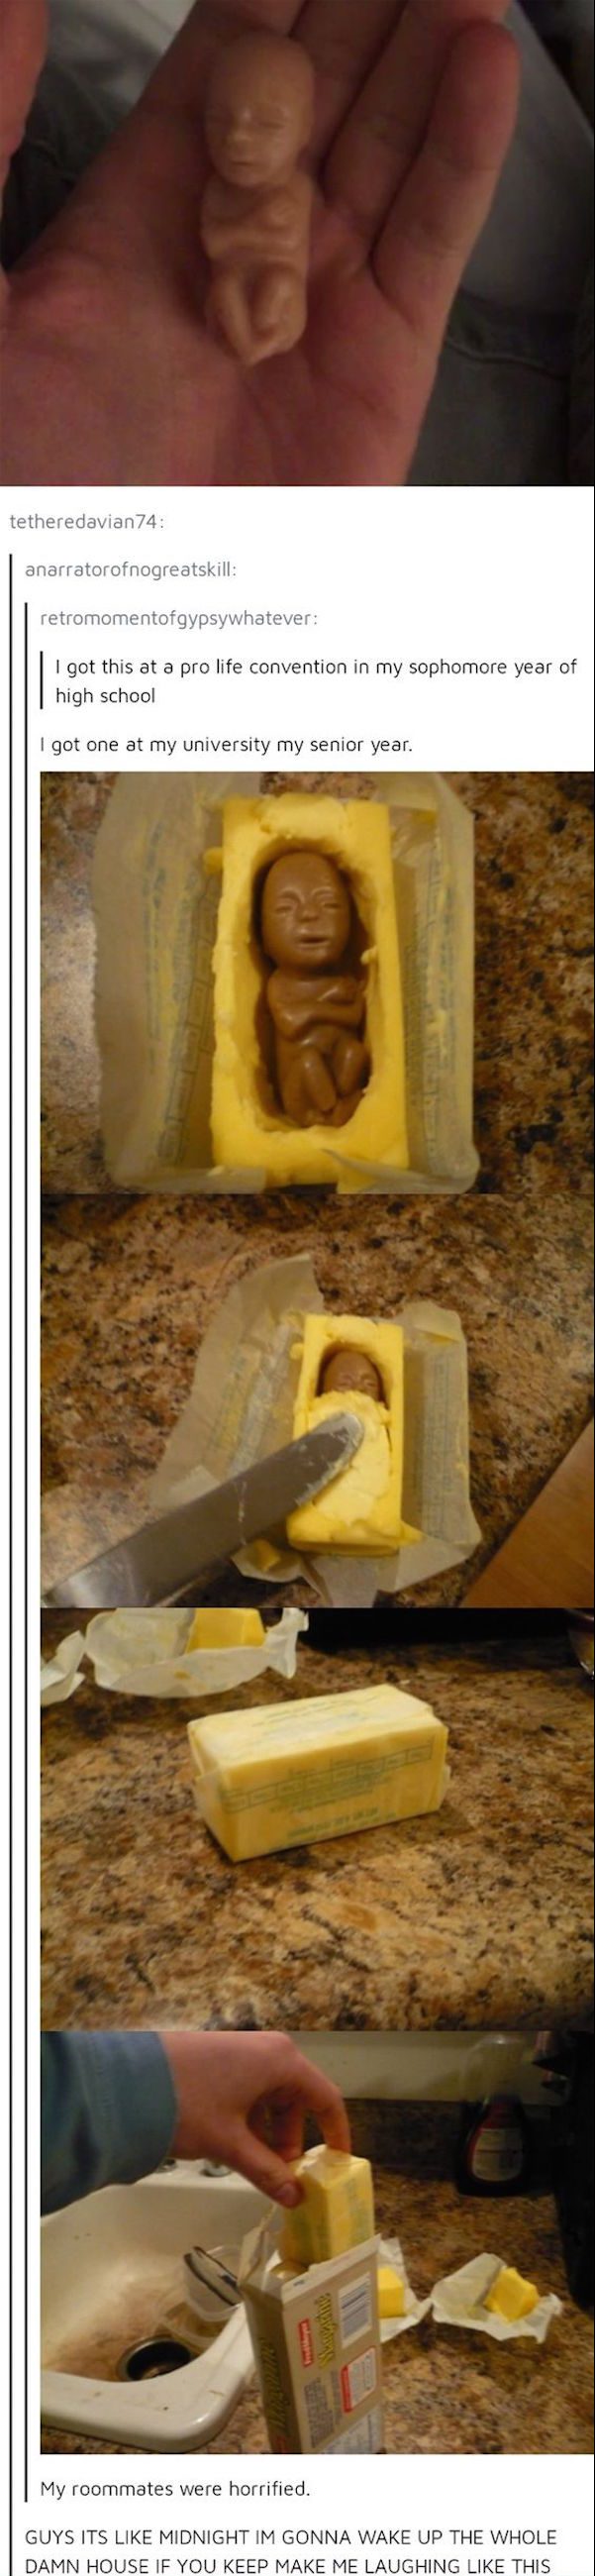 hilarious picture of pro-life baby toy in butter prank, funny internet pictures, funny internet, funniest pictures on the internet, internet funny, internet funny photos, funny web pictures, net jokes pictures, most funny pictures on the internet, the internet funny, funny internet photos, funniest images on the web, funniest images on the internet, funny pictures around the internet, funniest pics on the net, funny net, hysterically funny pictures, funny live pics, weekend jokes pictures, funny pictures messages photos, no way funny images, daily funny pics, craziest pictures on the internet, hilarious pictures, best funny pictures, funny pictures, daily funny pictures, funny pictures, hilarious pictures, best funny pictures